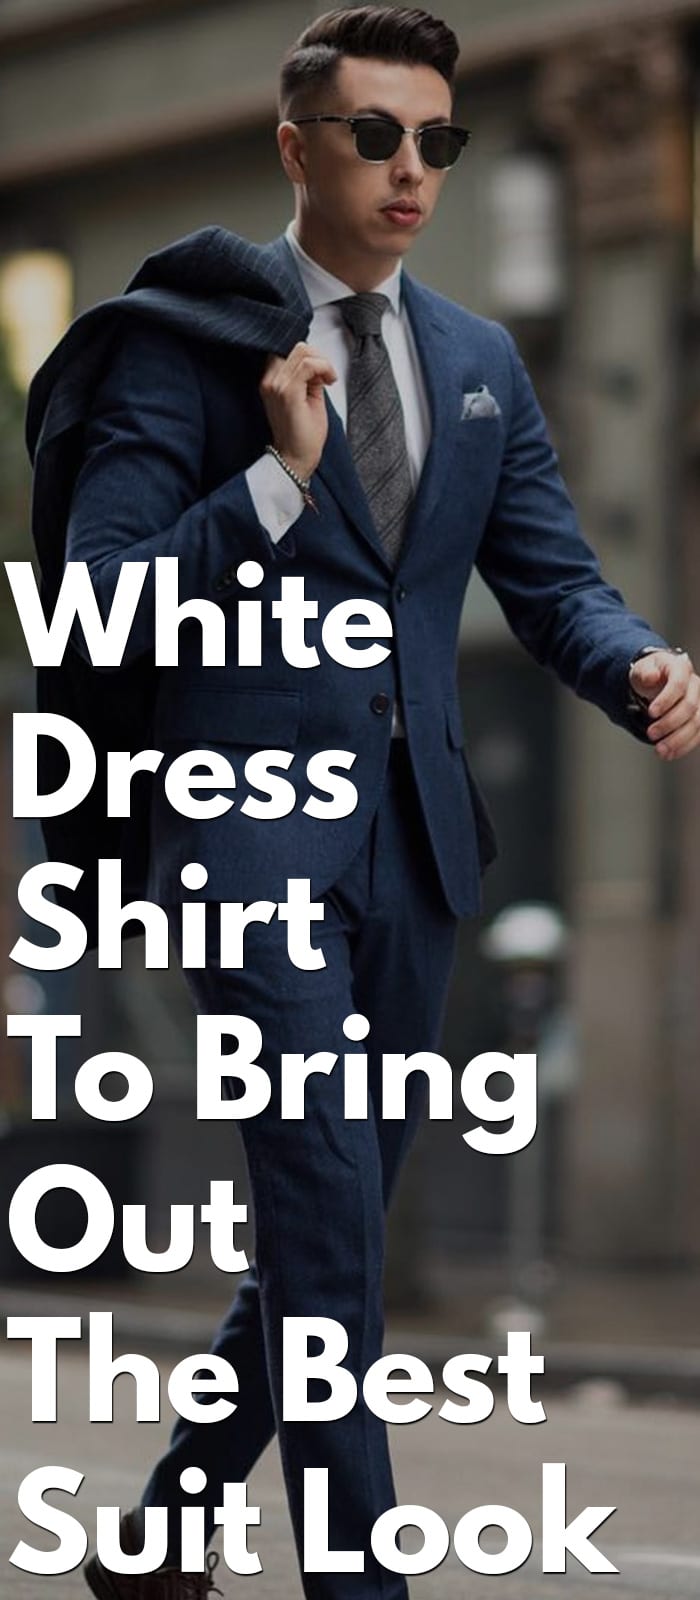 White Dress Shirt To Bring Out The Best Suit Look